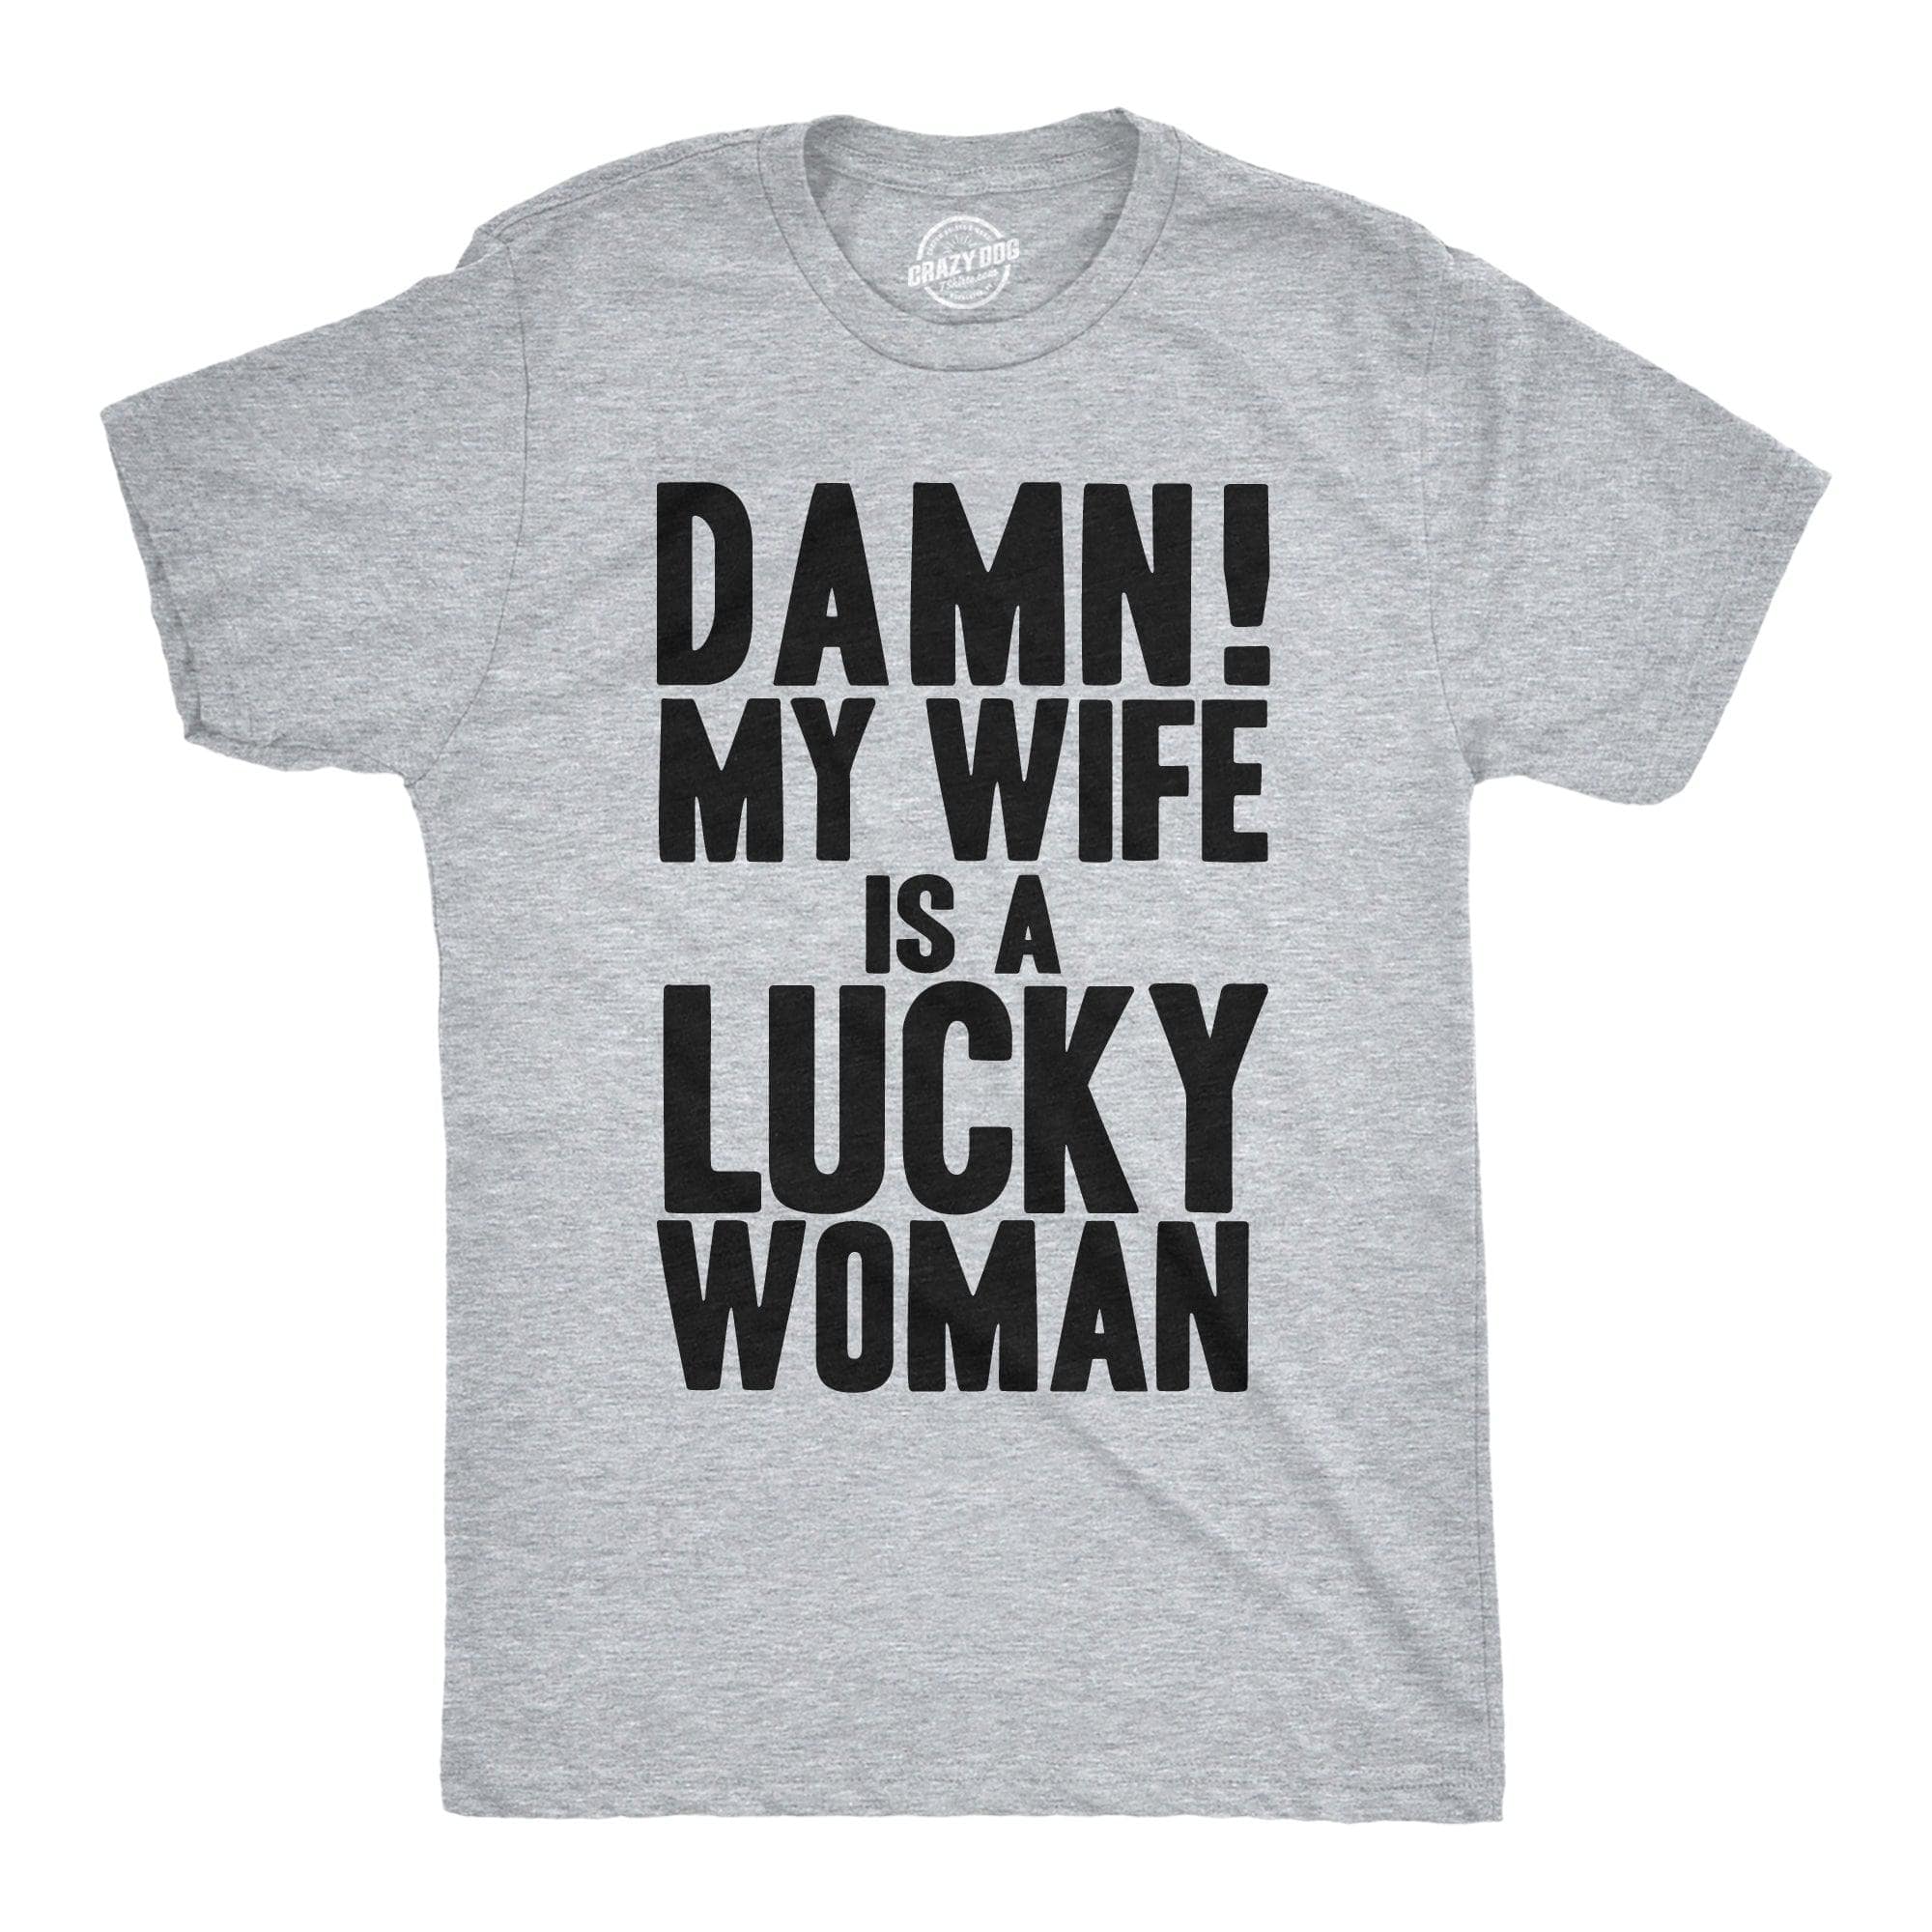 Damn My Wife Is A Lucky Woman Men's Tshirt  -  Crazy Dog T-Shirts